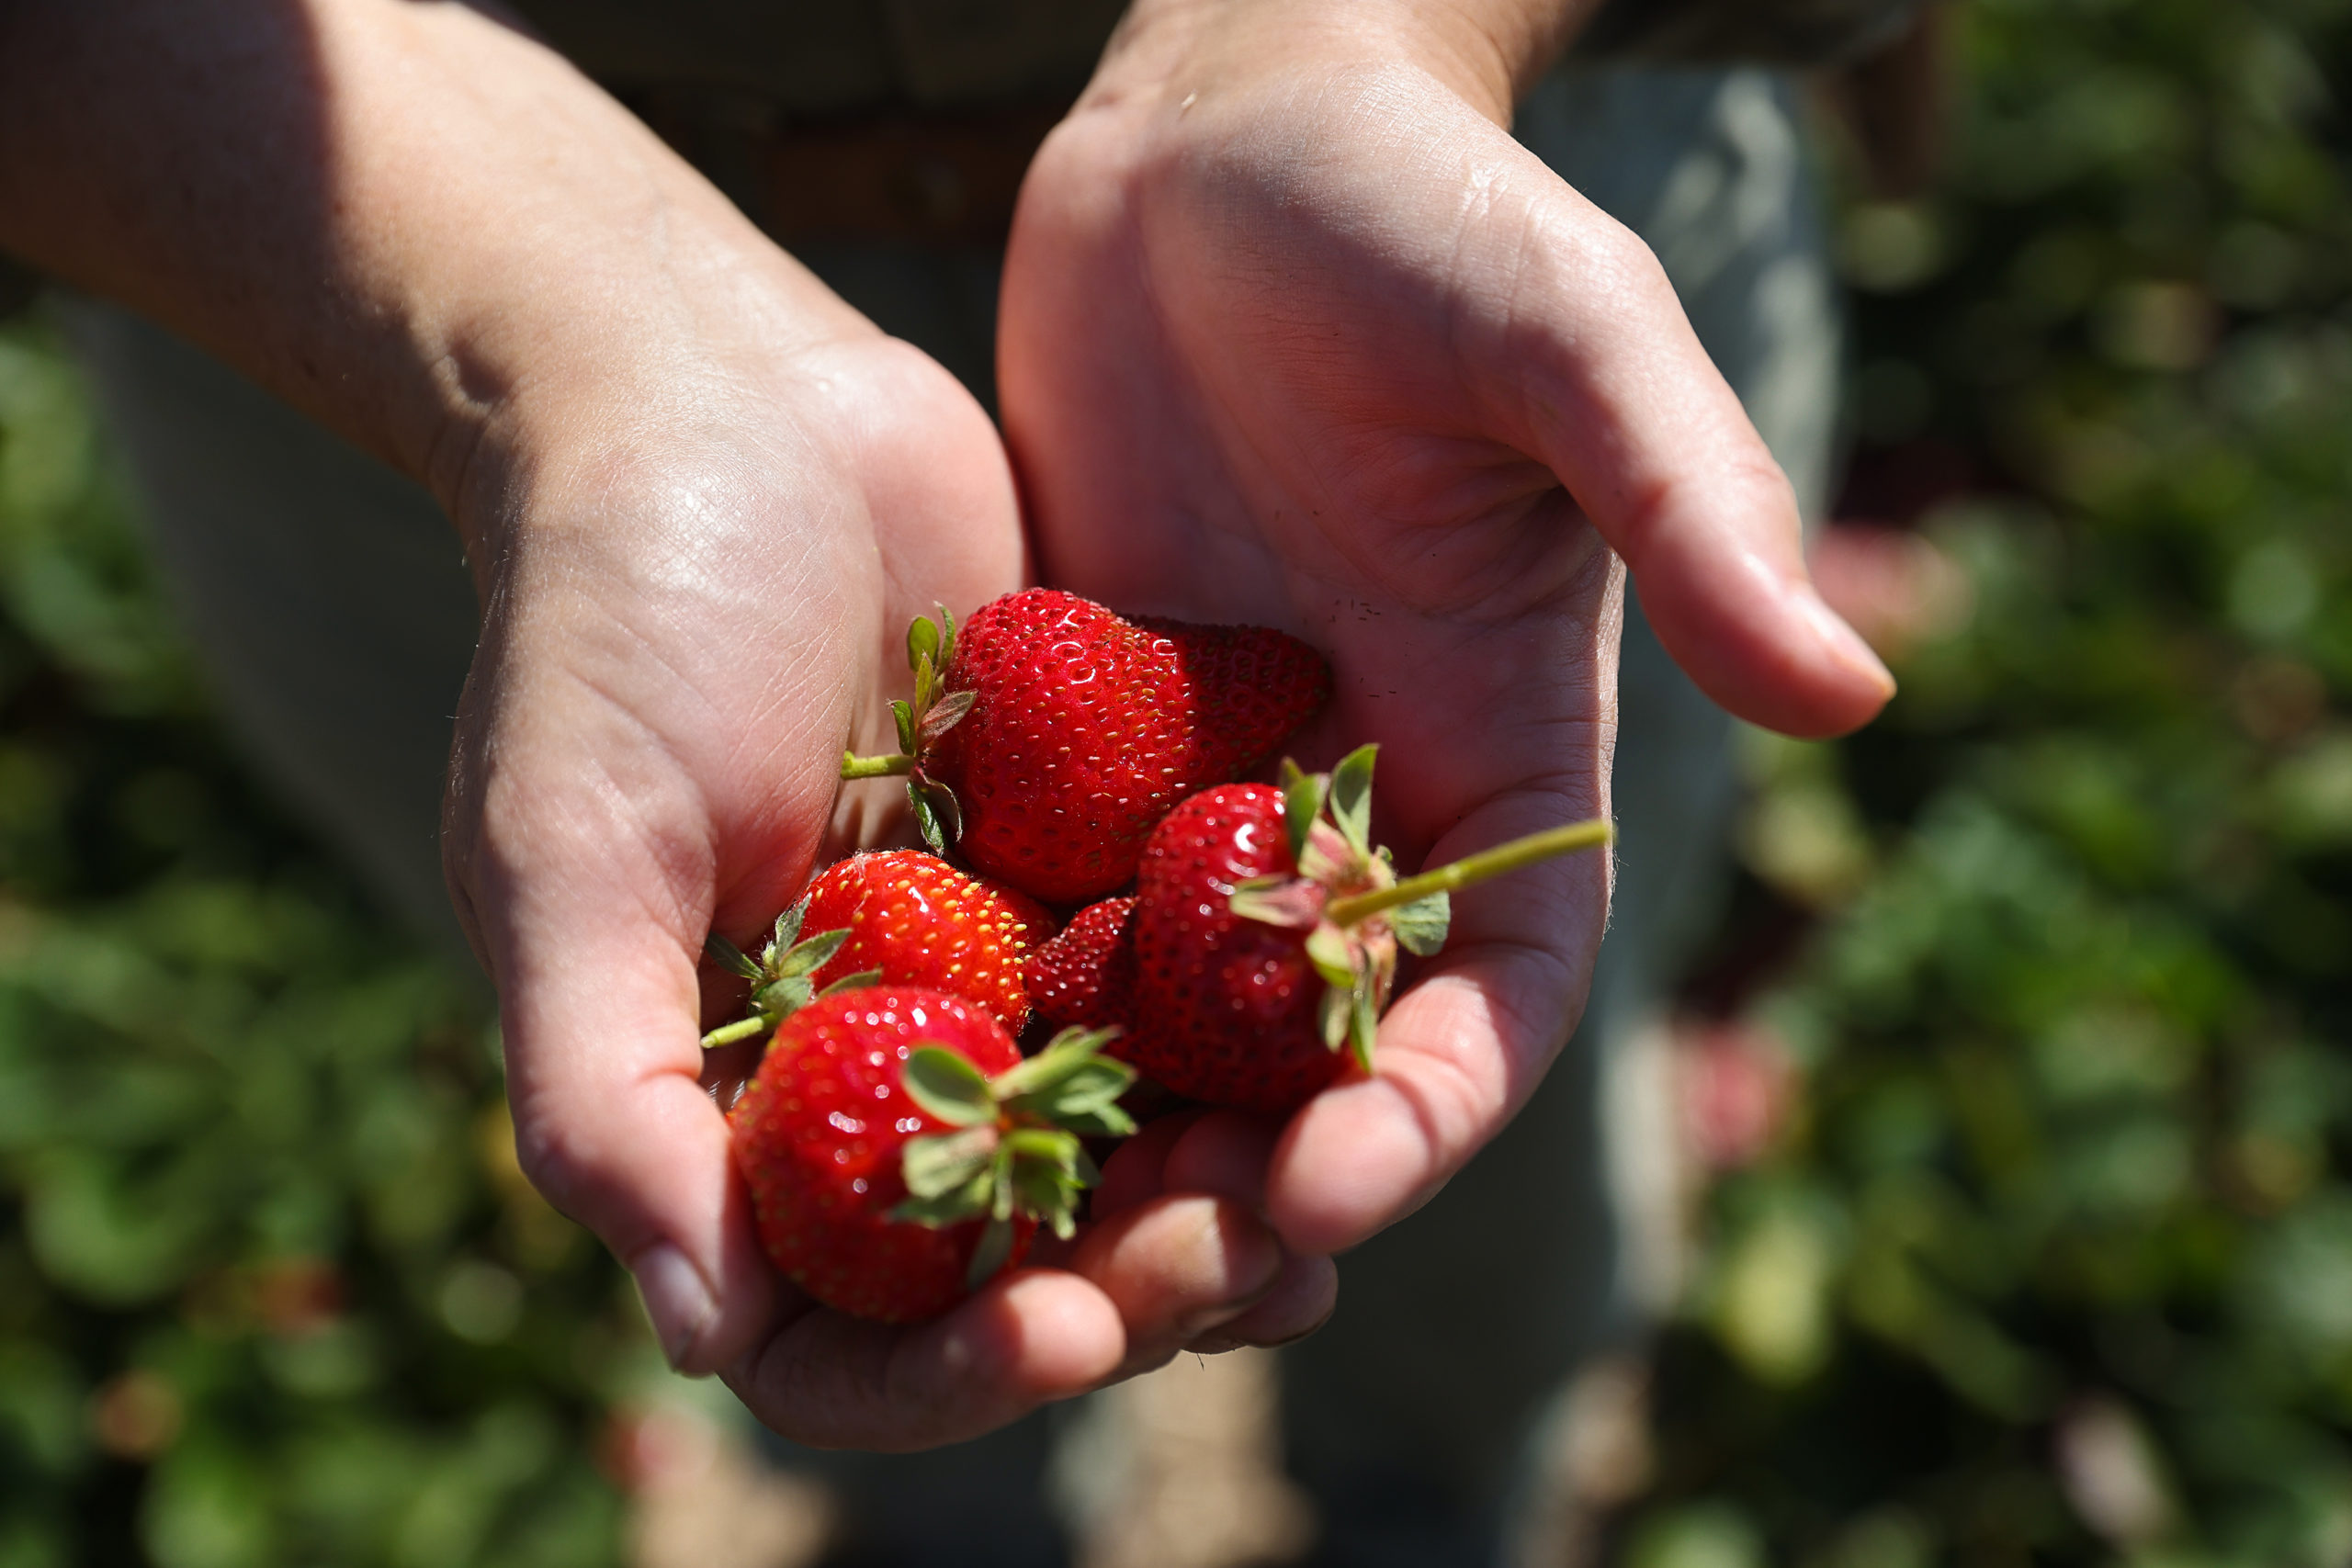 Freshly picked strawberries at Piano Farm in Bloomfield on Wednesday, July 28, 2021. (Christopher Chung/ The Press Democrat)